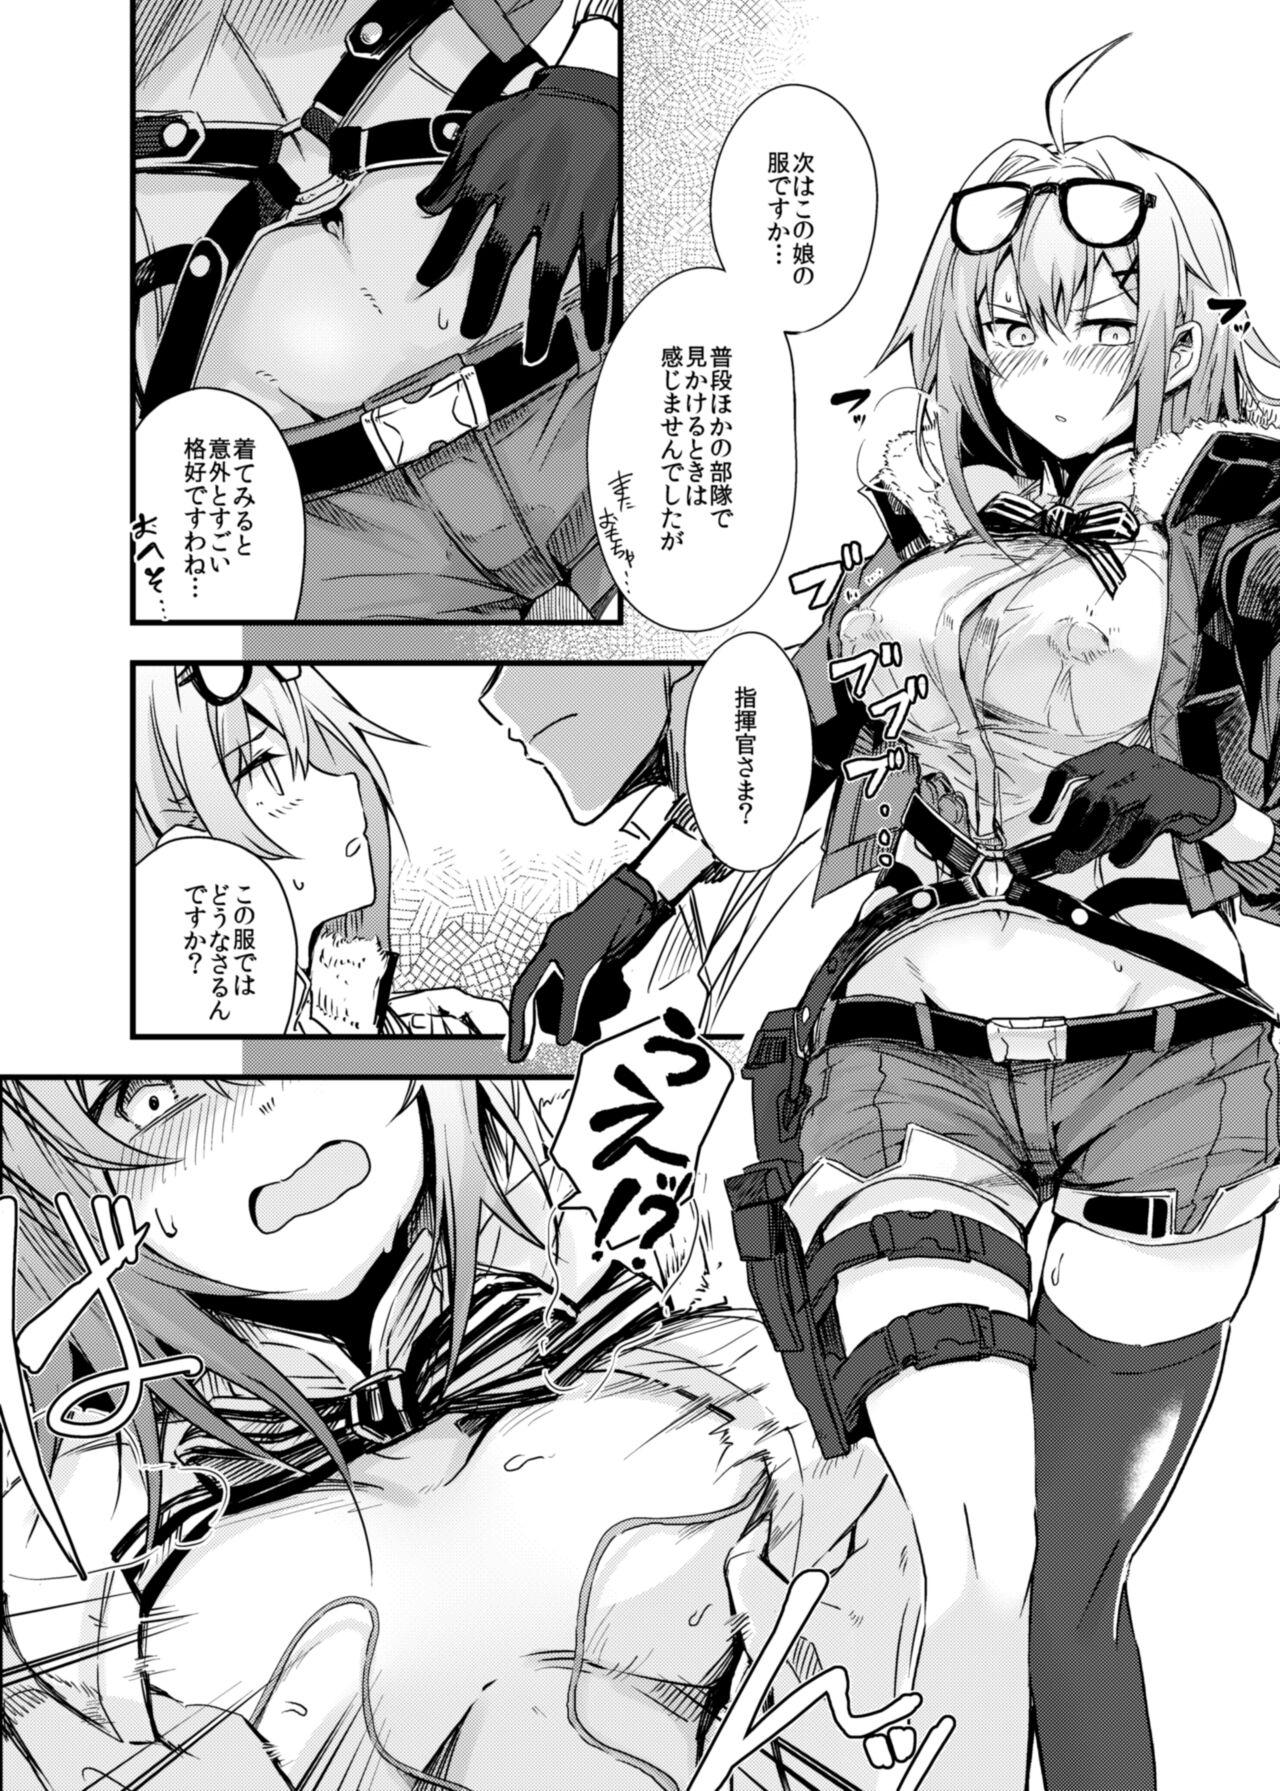 Mexico Kisekae Ningyou - Girls frontline Hairy Sexy - Page 9